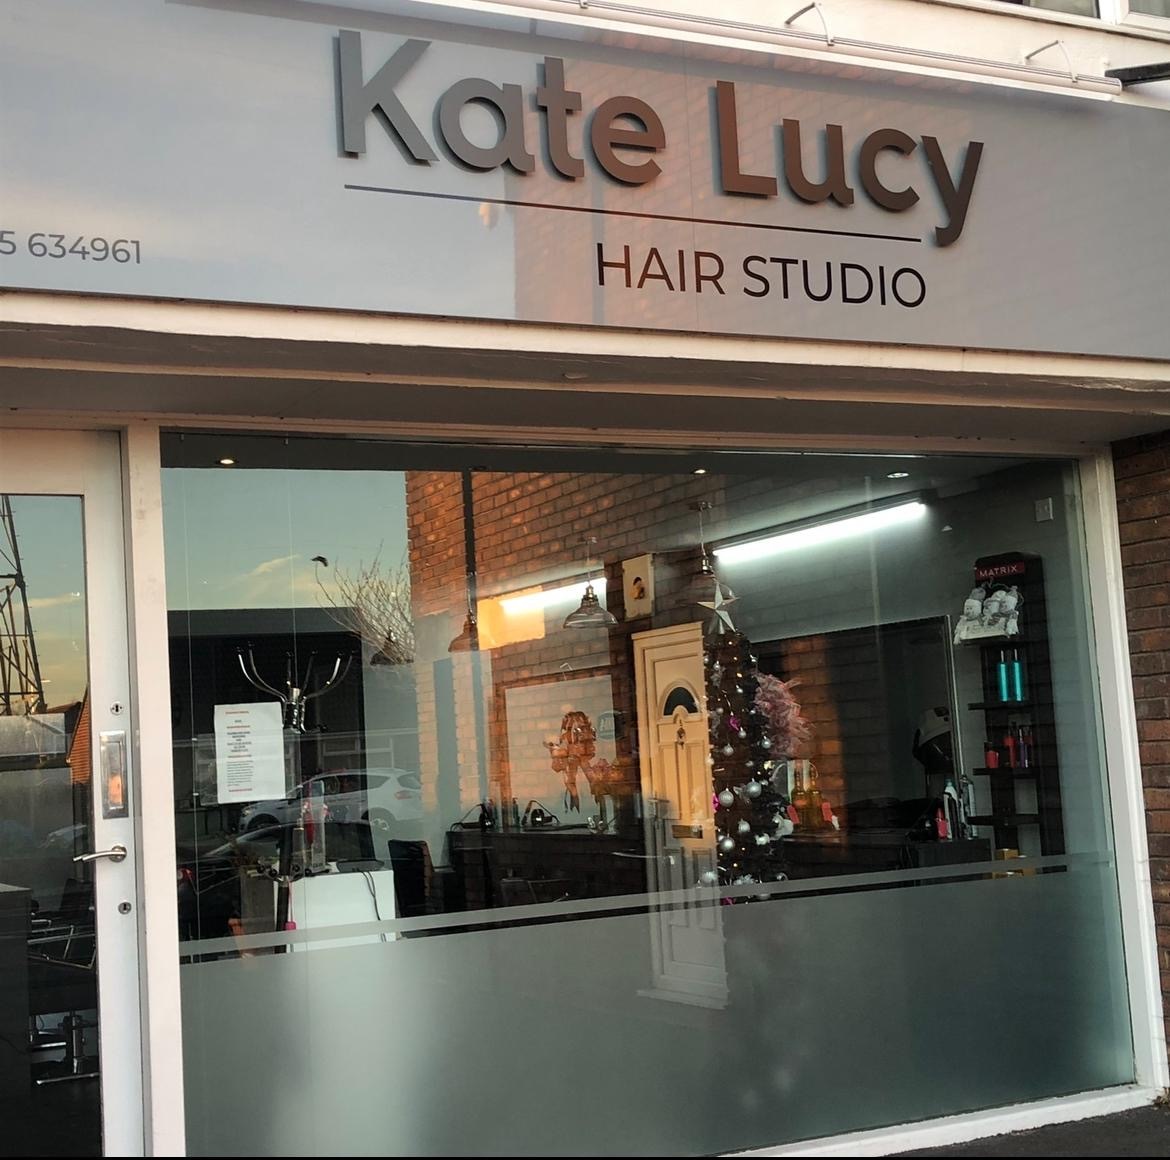 Kate Lucy Hair Studio opened on Gainsborough Road in 2015